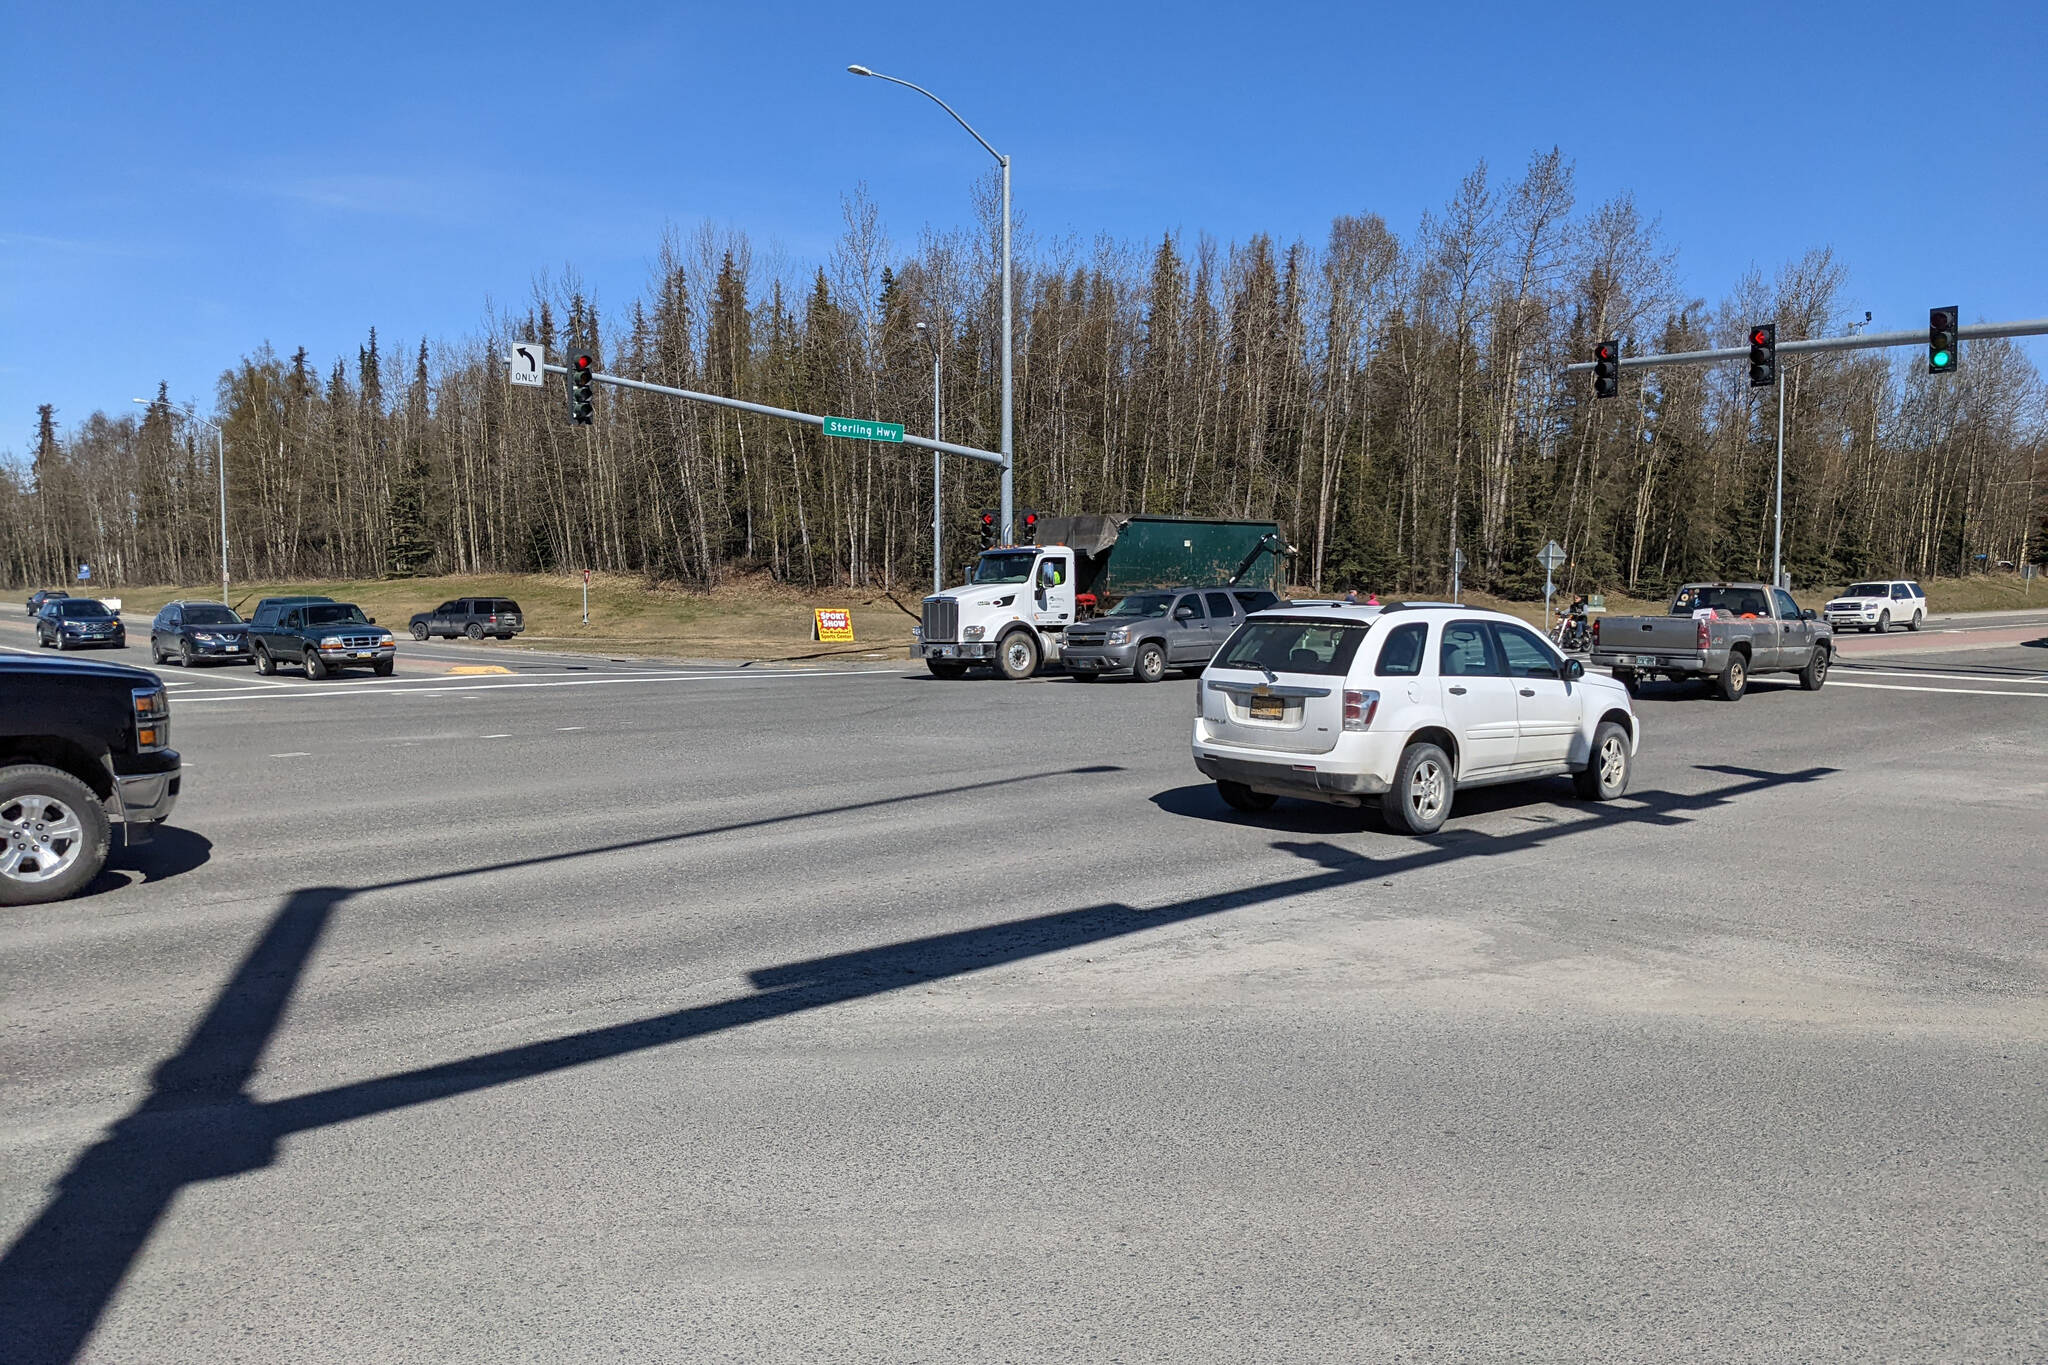 Traffic passes through the “Y” intersection of the Kenai Spur and Sterling highways on Saturday, May 7, 2022, in Soldotna, Alaska. The Kenaitze Indian Tribe this week announced plans for its fixed-route bus service, which would run between Nikiski and Sterling. (Photo by Erin Thompson/Peninsula Clarion file)